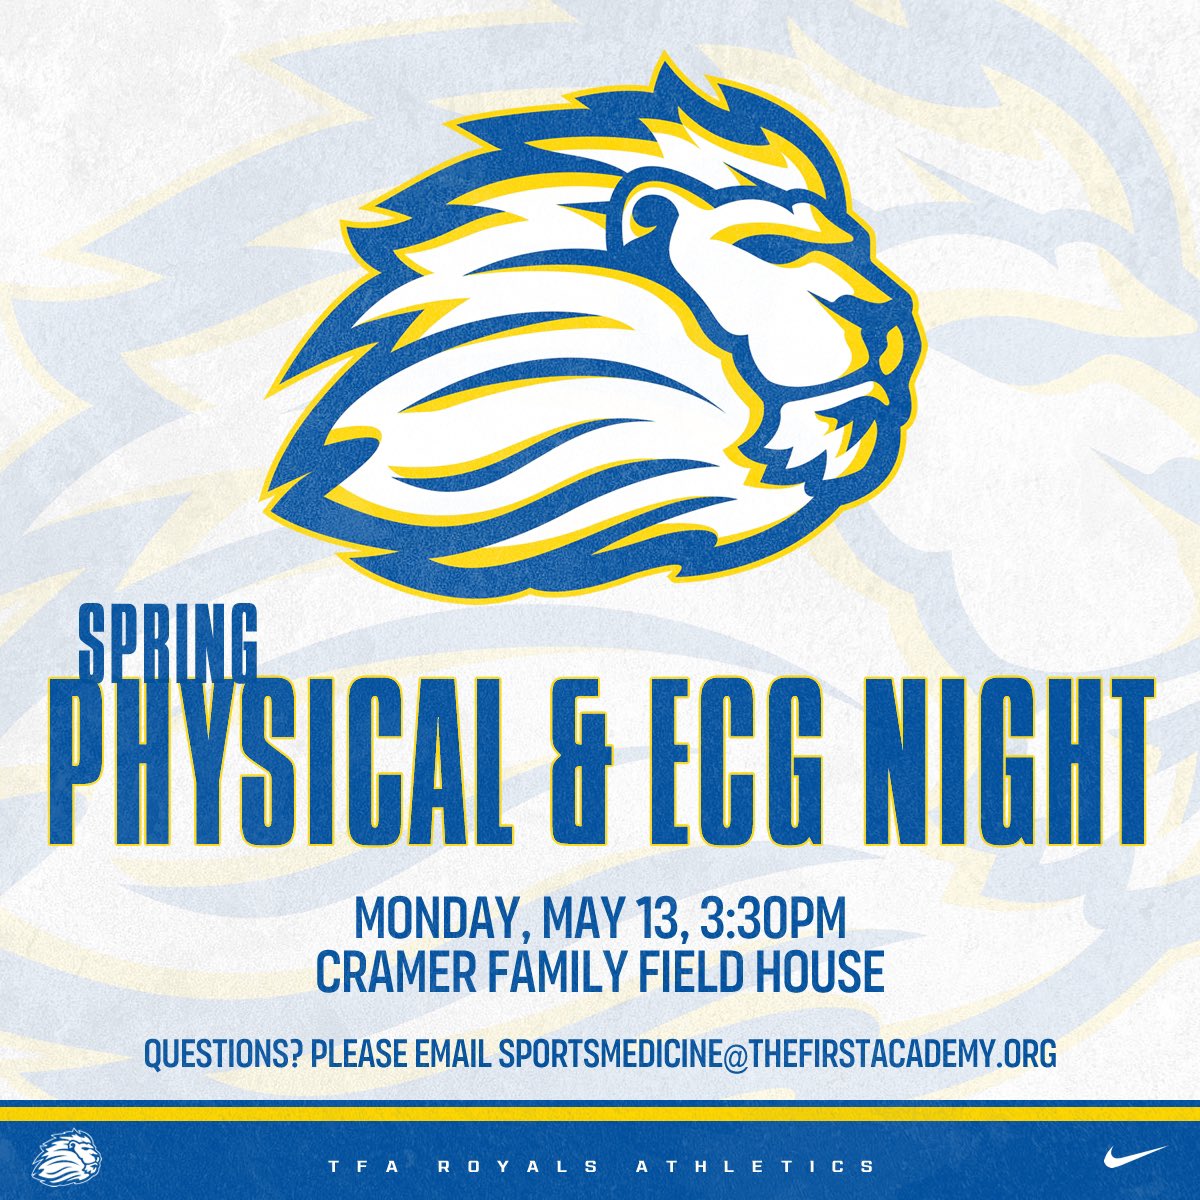 Save the date for Physical night! #GoRoyals